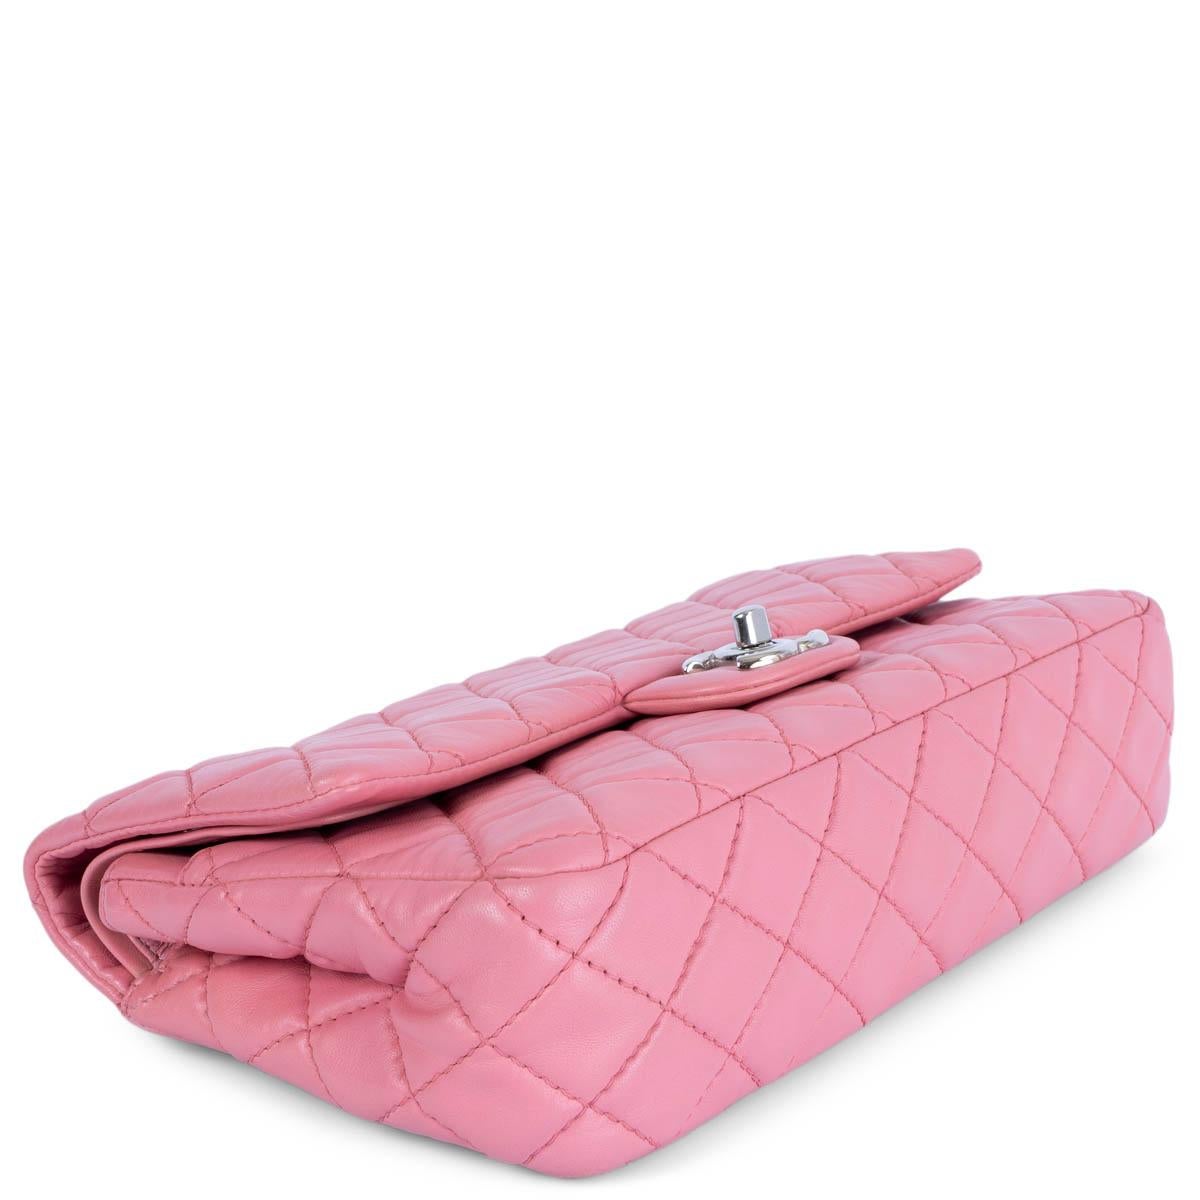 Women's CHANEL pink quilted lambskin leather SOFT CLASSIC MEDIUM TIMELESS Shoulder Bag For Sale